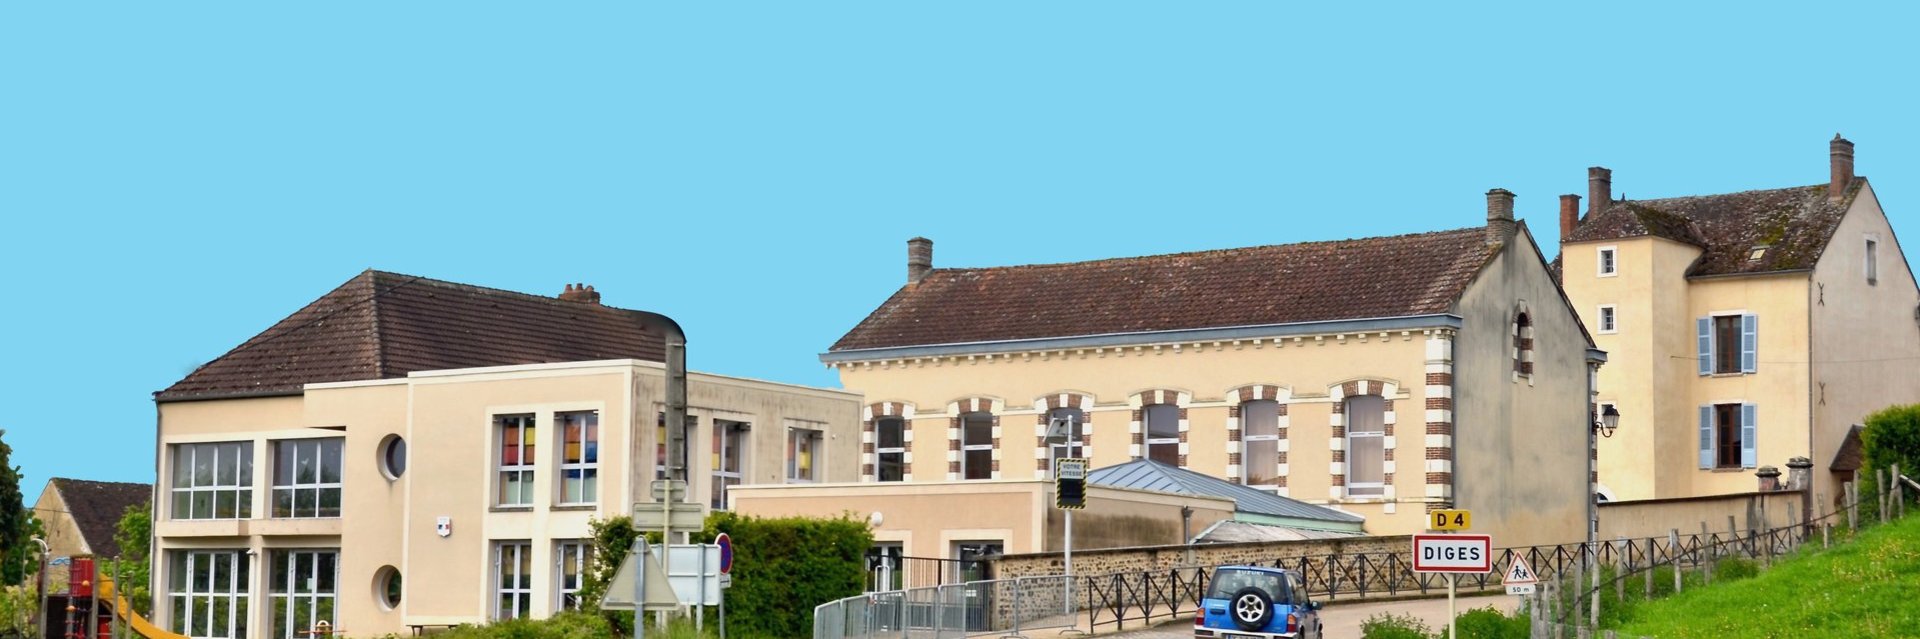 Mairie Commune Diges Puisaye Yonne